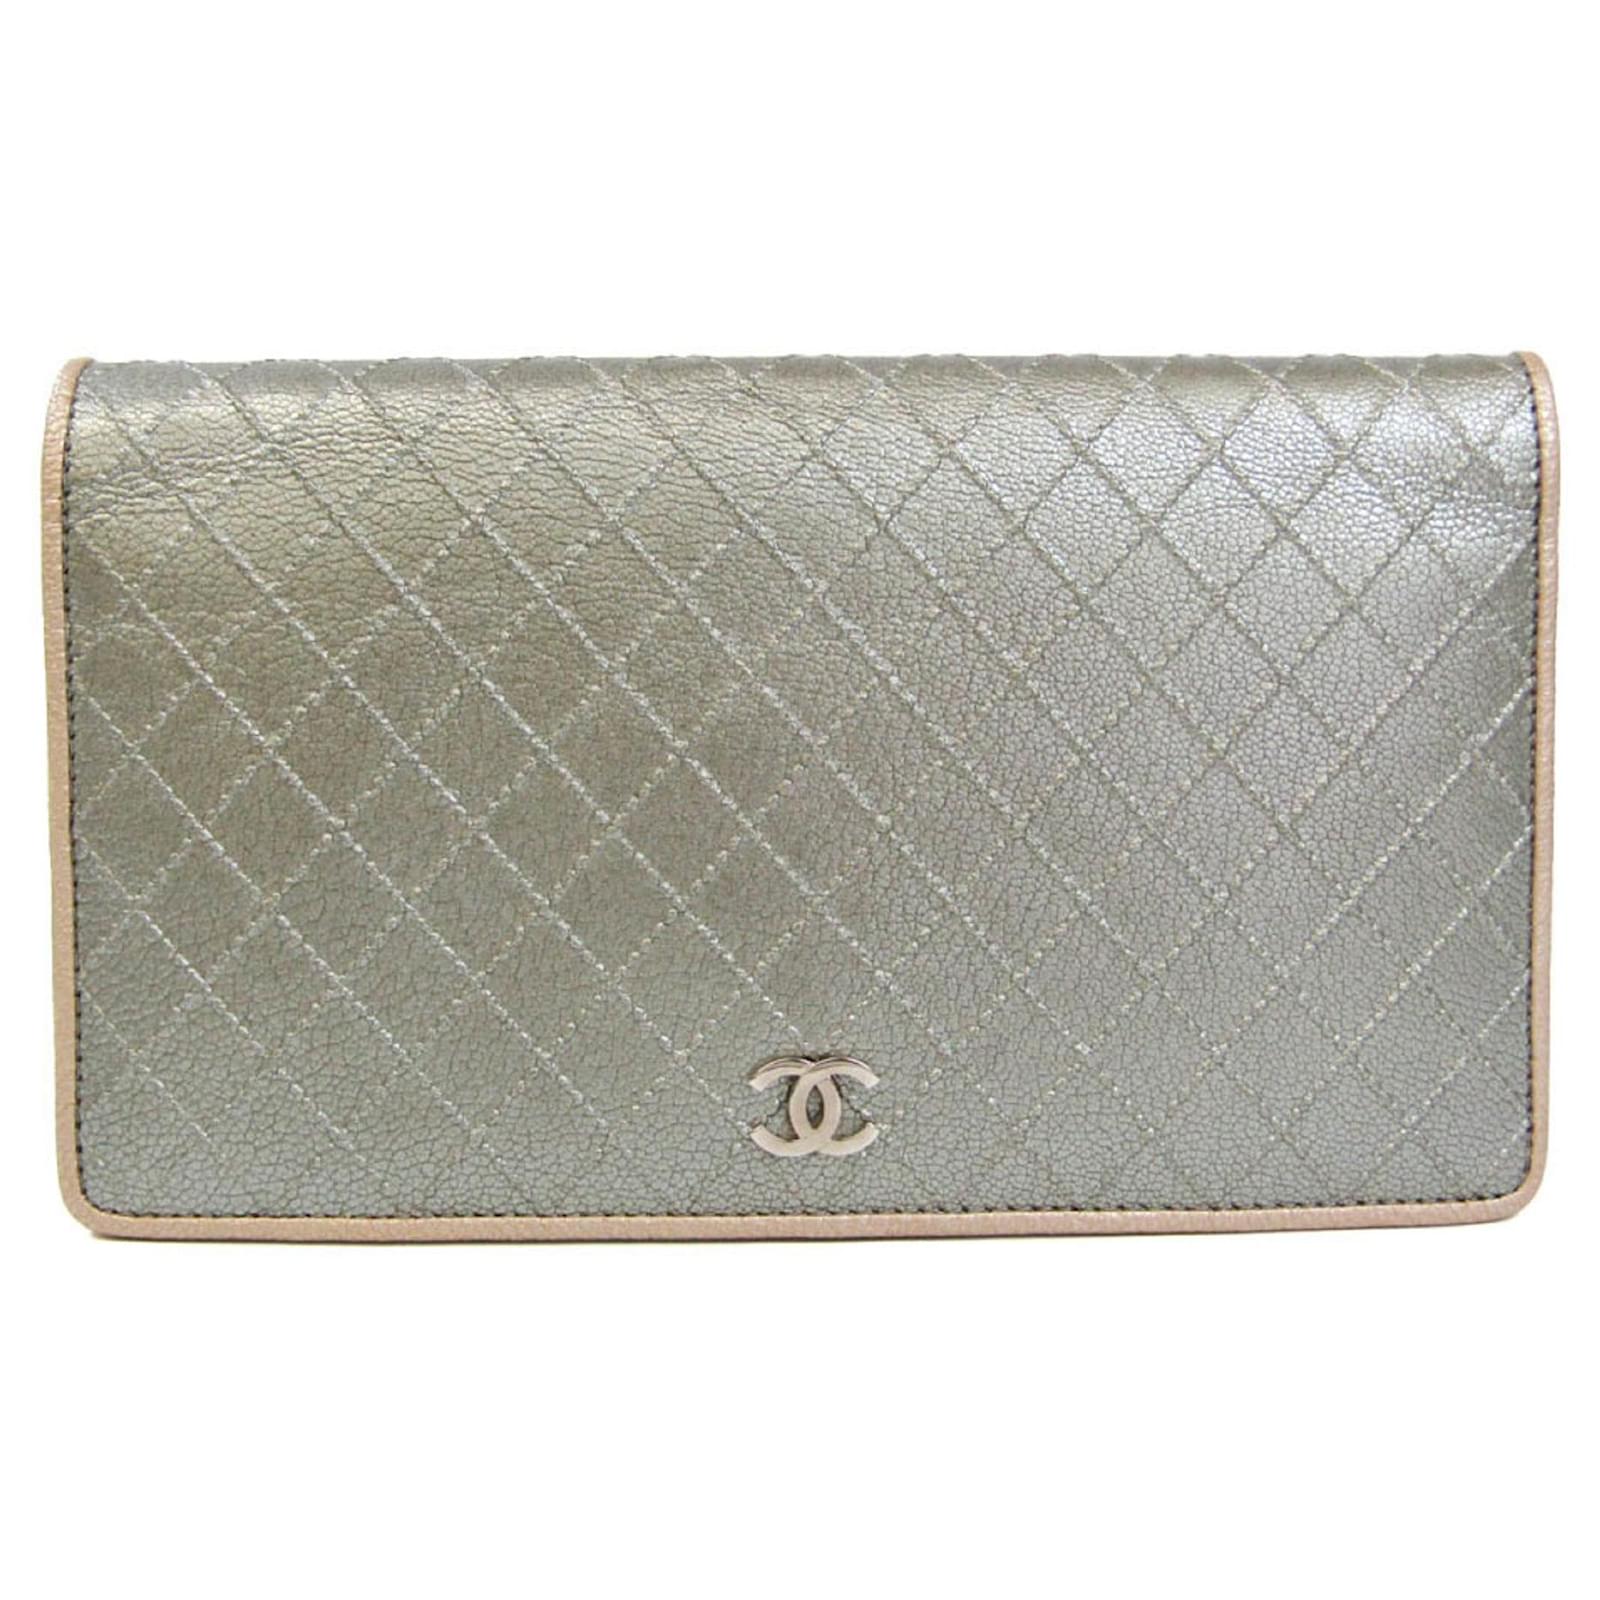 Chanel CHANEL Round Zipper Long Wallet Matelasse Coco Mark Leather